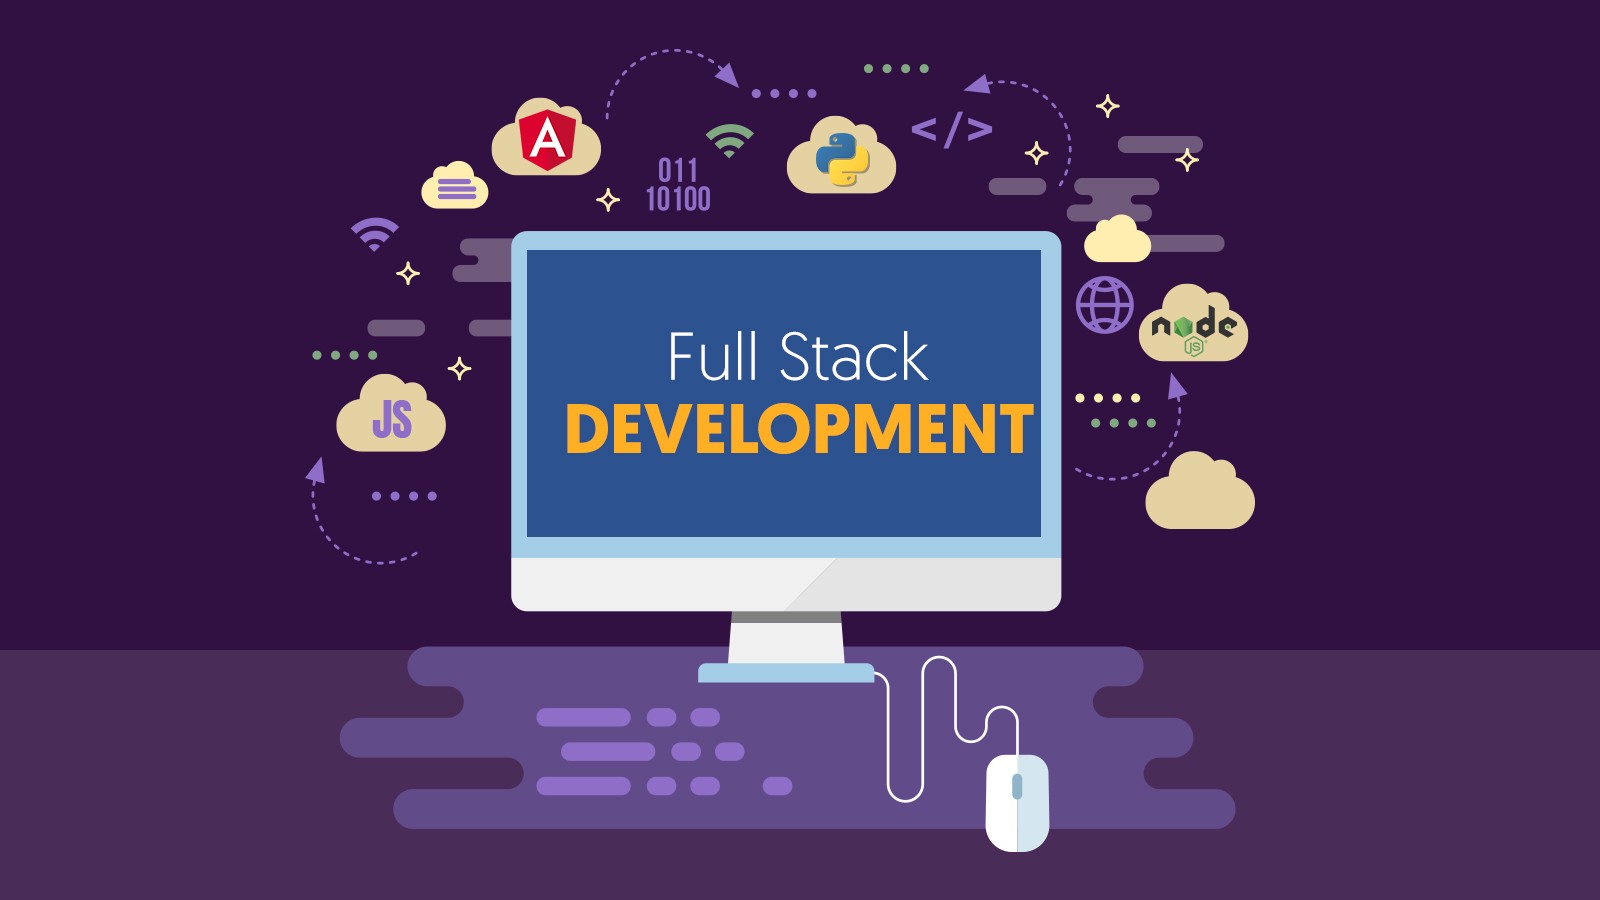 How to Become a Full Stack Web Developer in 2019